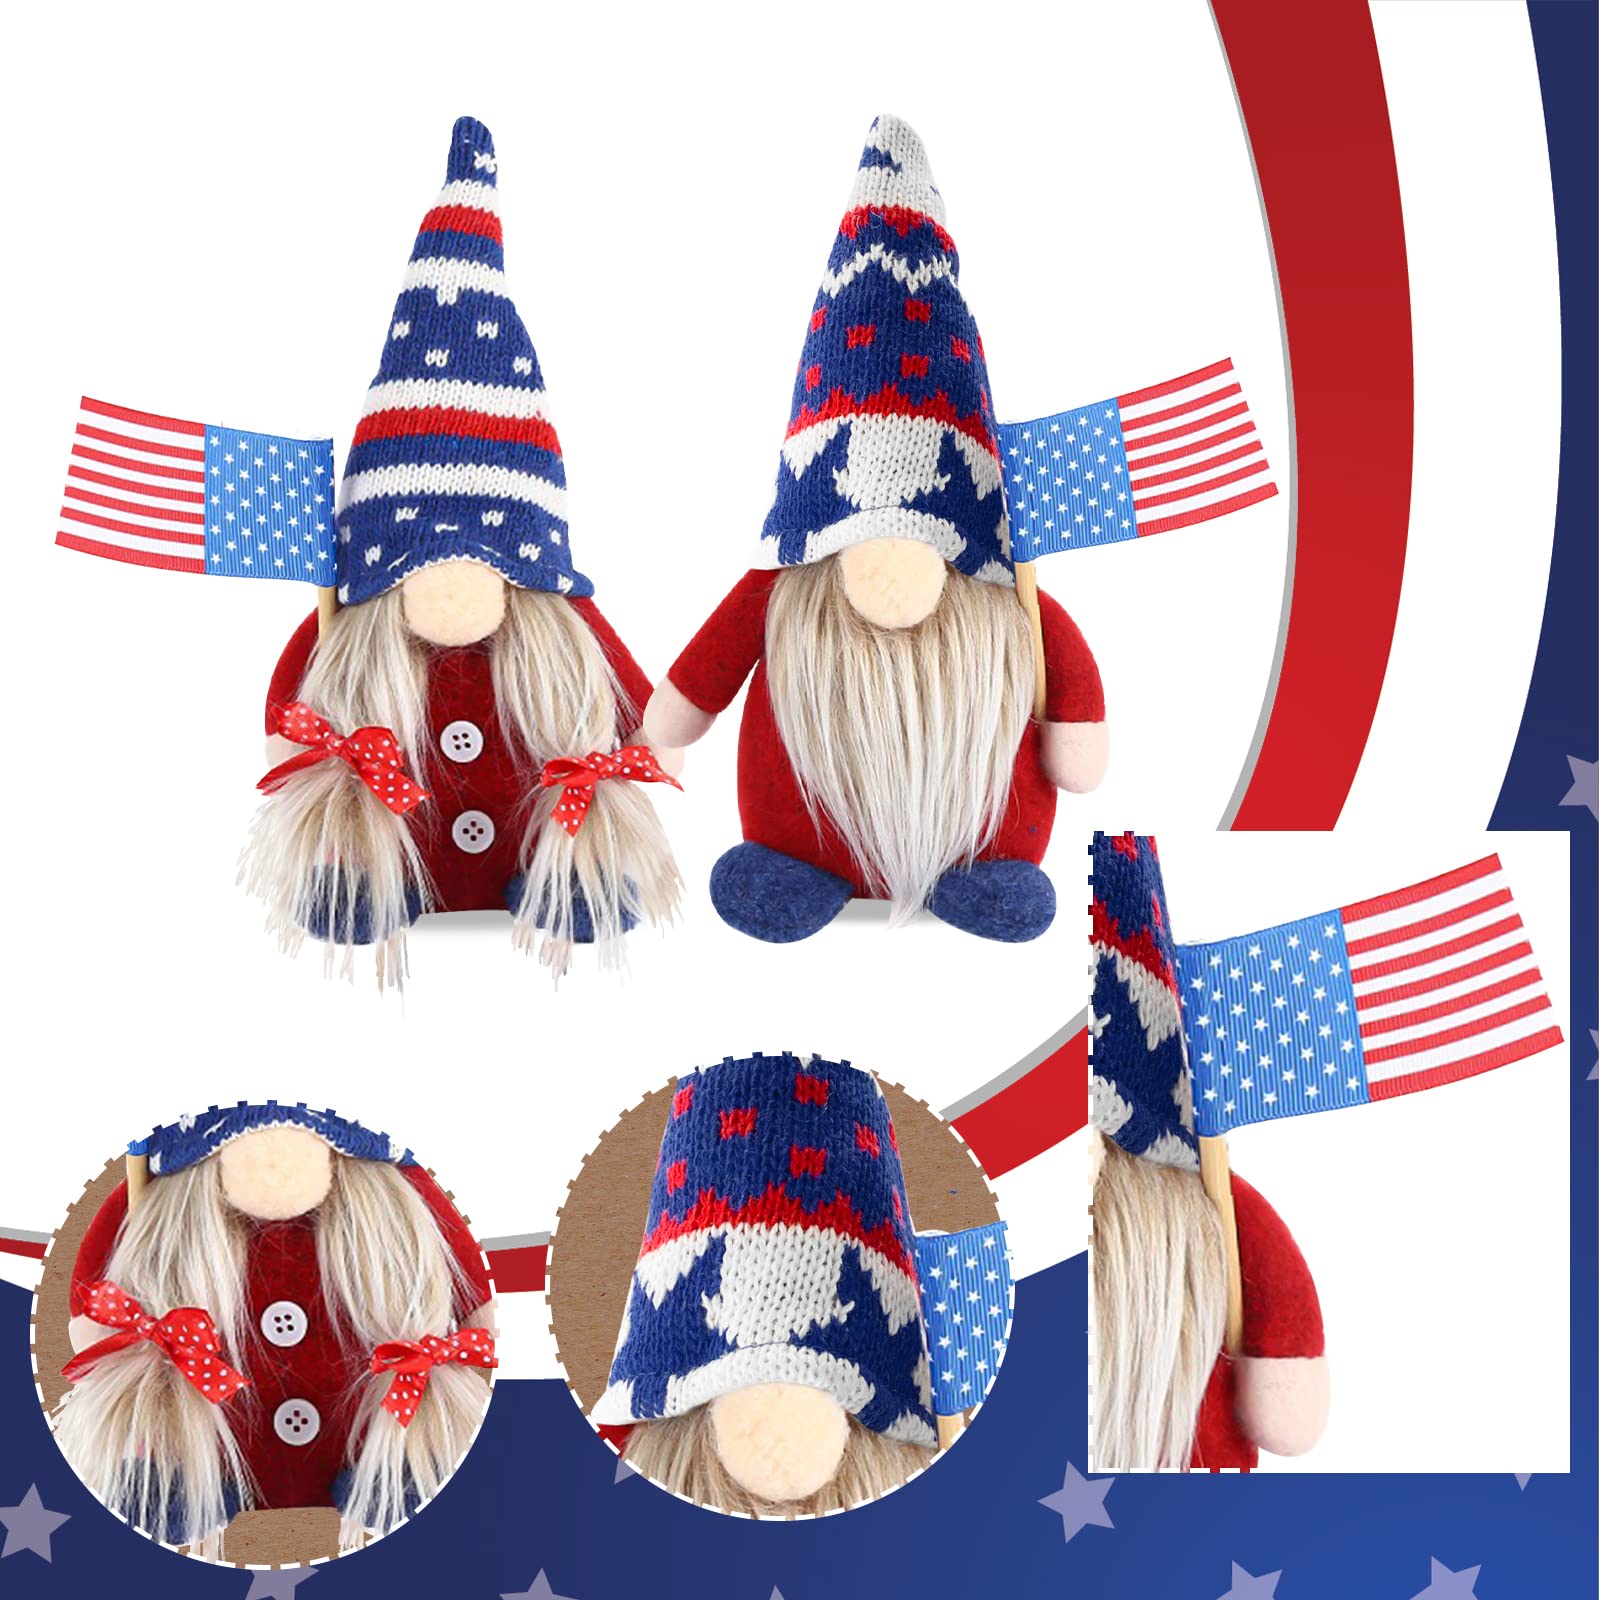 Lovinland New US Citizen Gifts, American Flag Gnomes, Birthday/Retirement/Veteran Christmas Thanksgiving Gifts for New Citizenship/Friend/Father/Grandpa/Adult, American Native Decor for Home